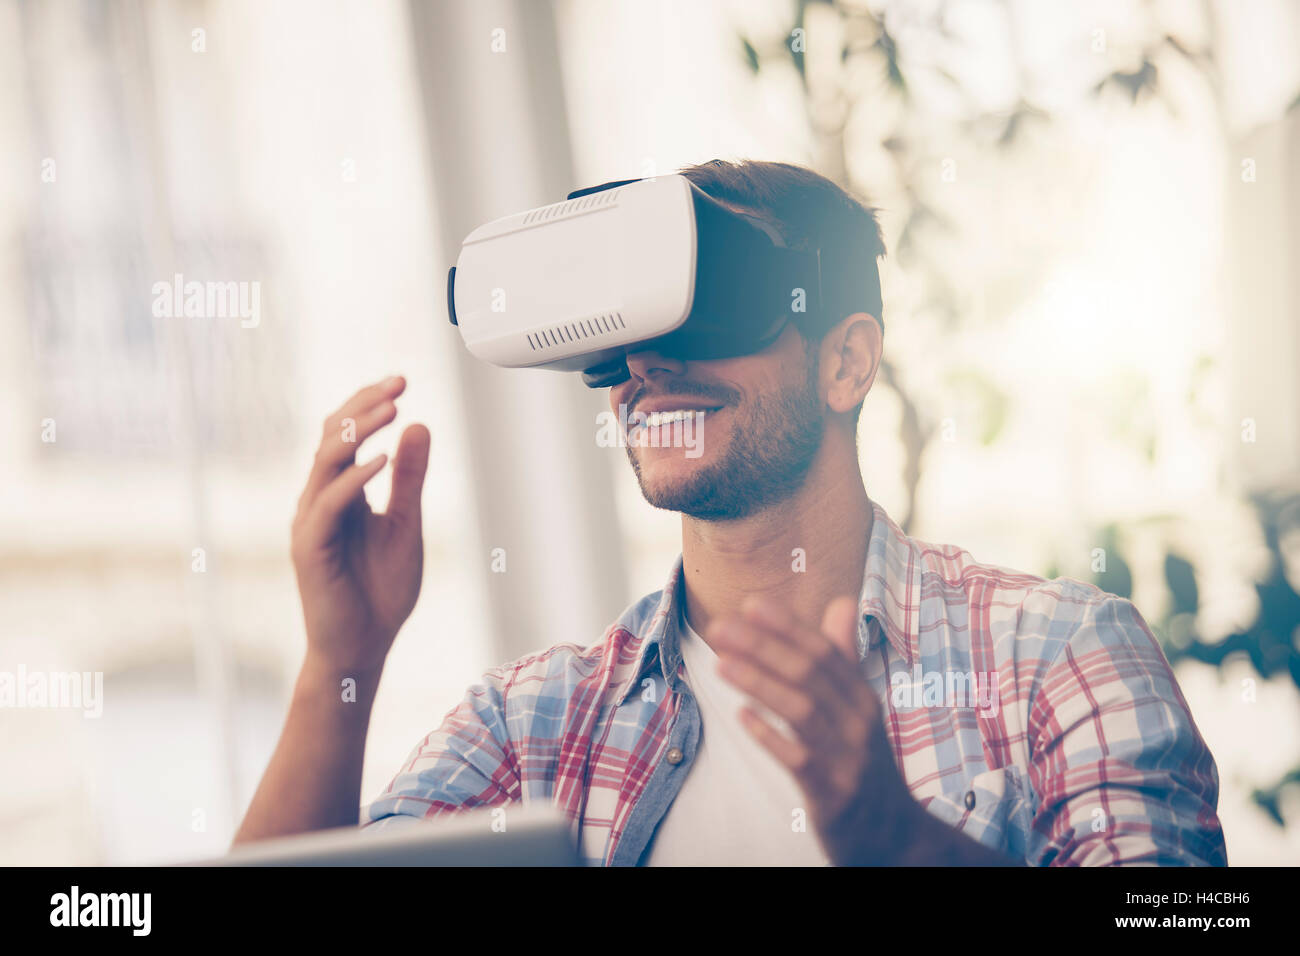 Entrepreneurs testing virtual reality technology with colleague in office. Stock Photo